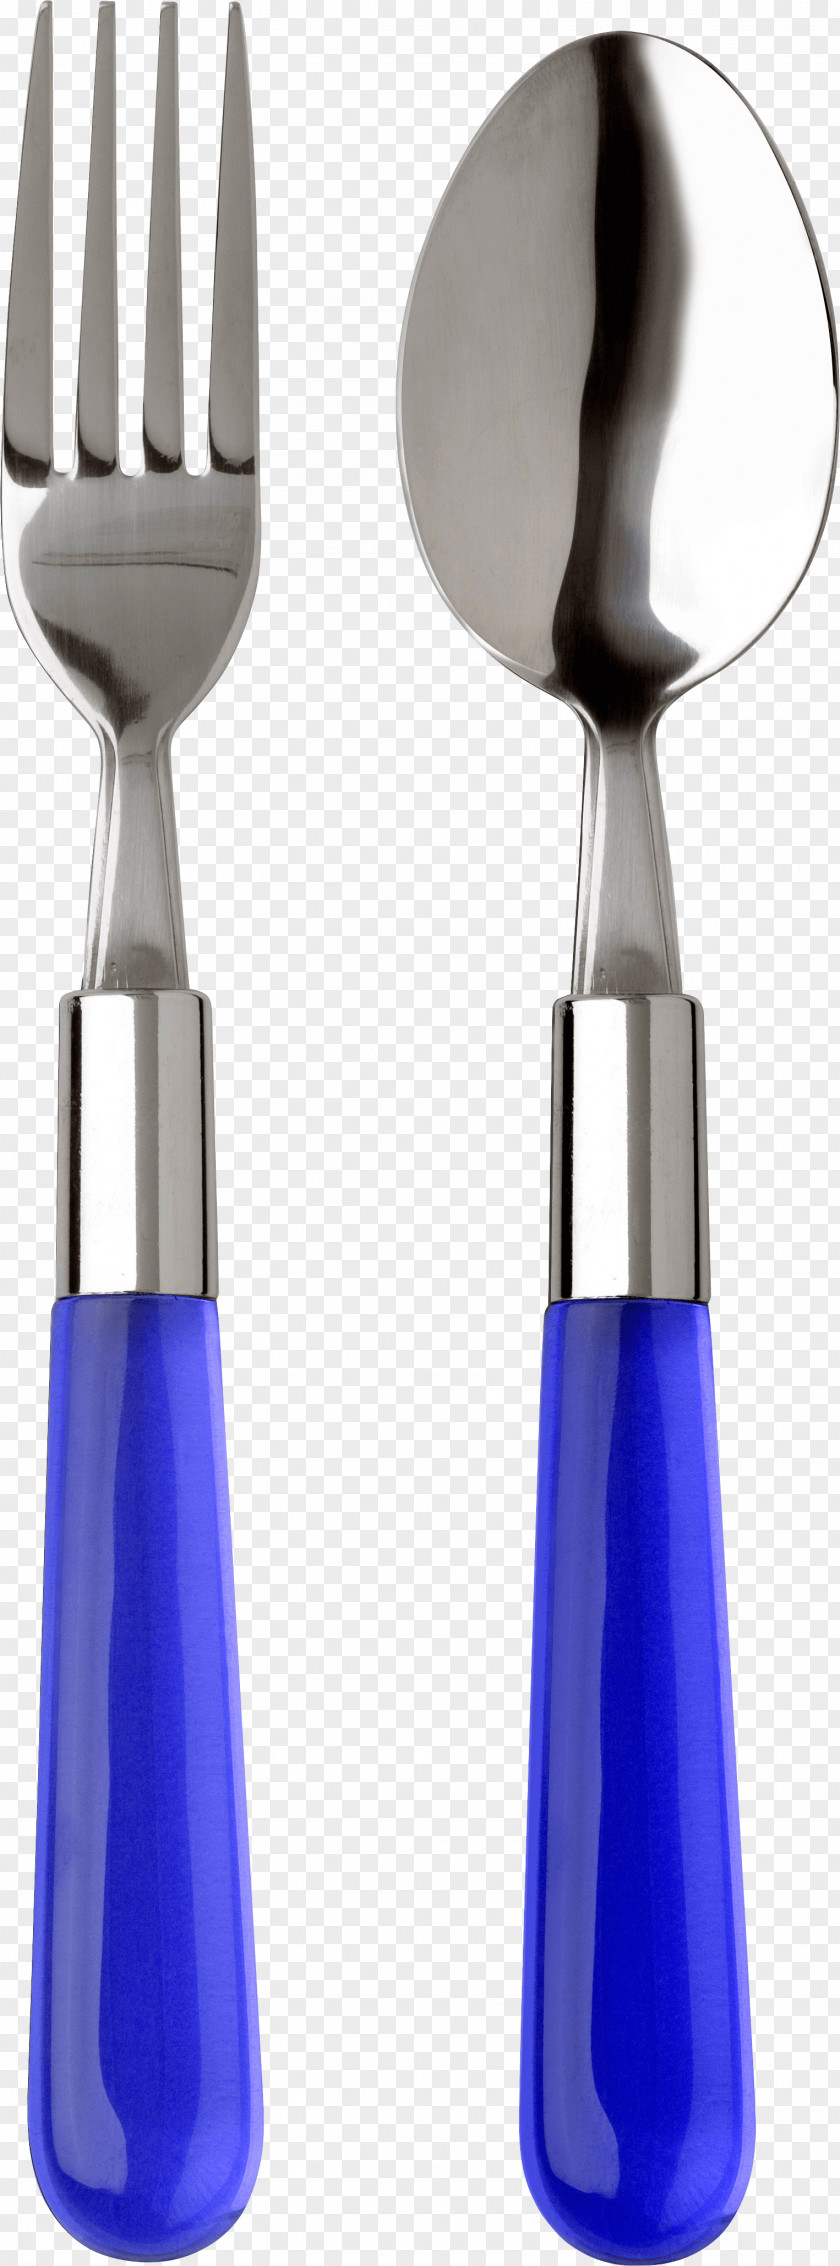 Fork And Spoon Images Knife Spork PNG